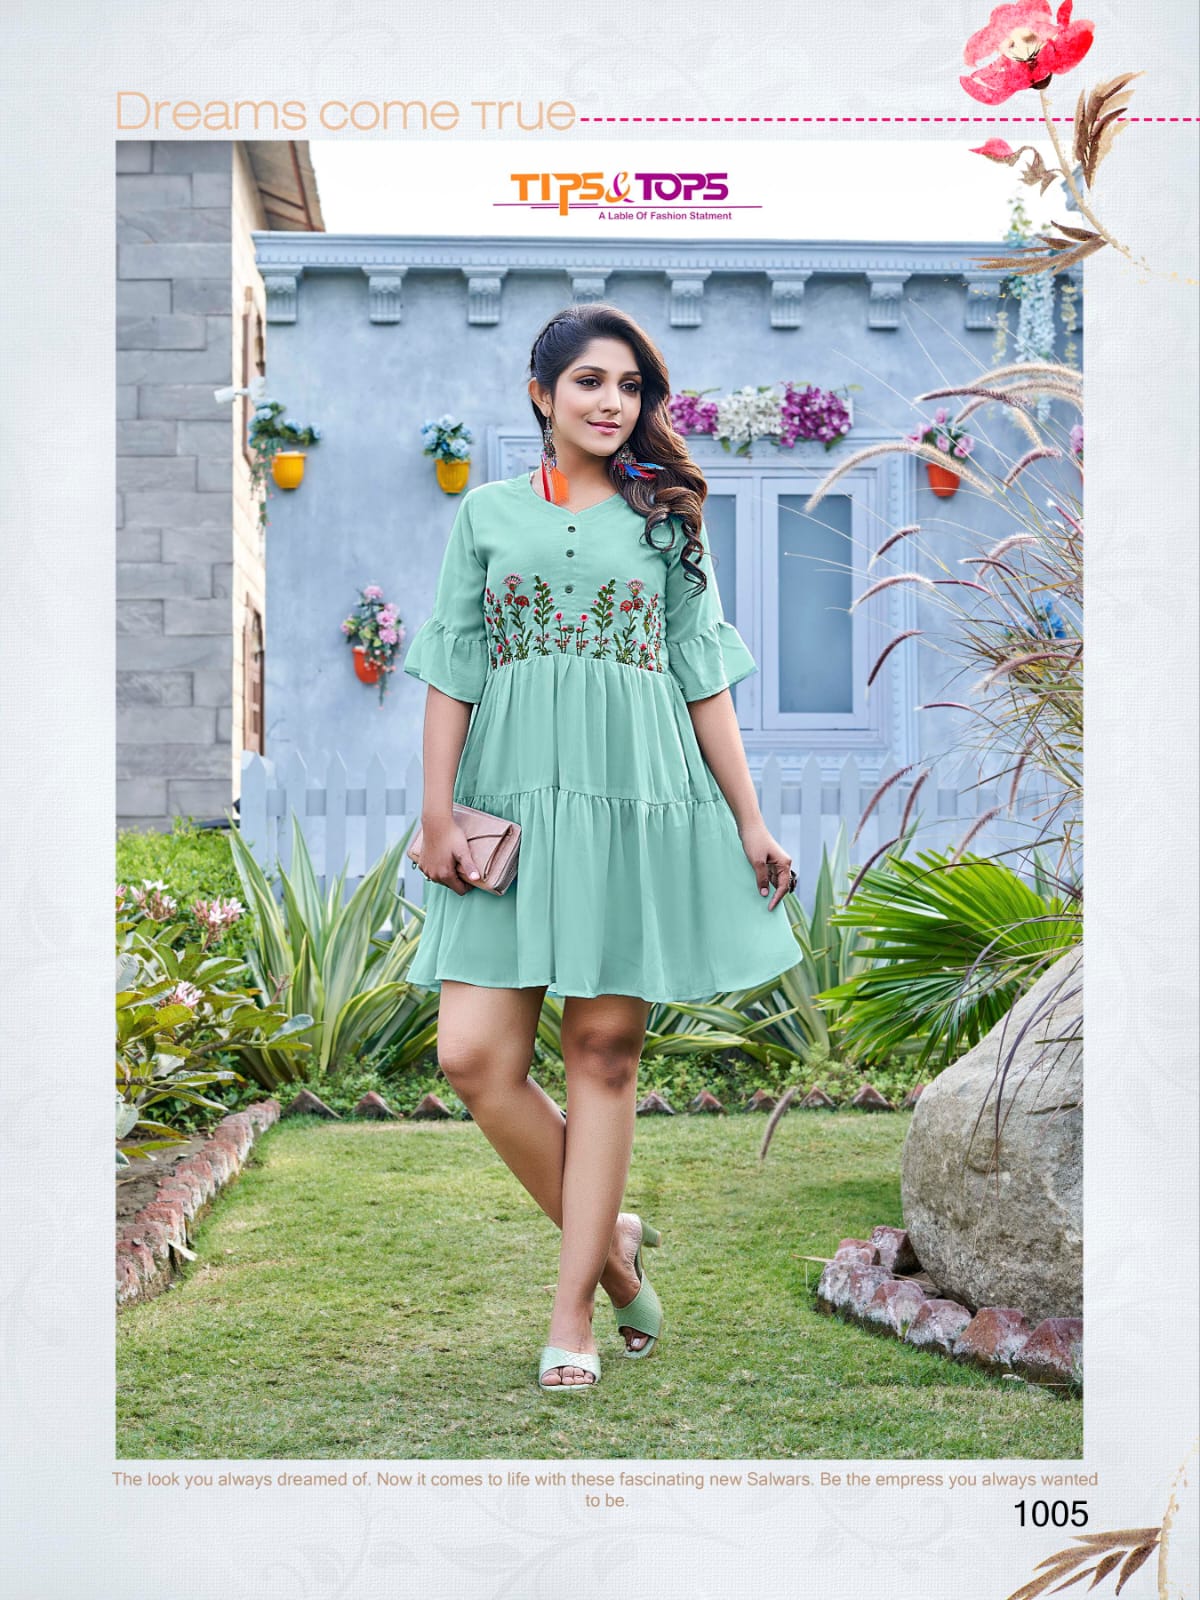 TIPS & TOPS INSTA GIRL VOL 02 KURTI Anant Tex Exports Private Limited